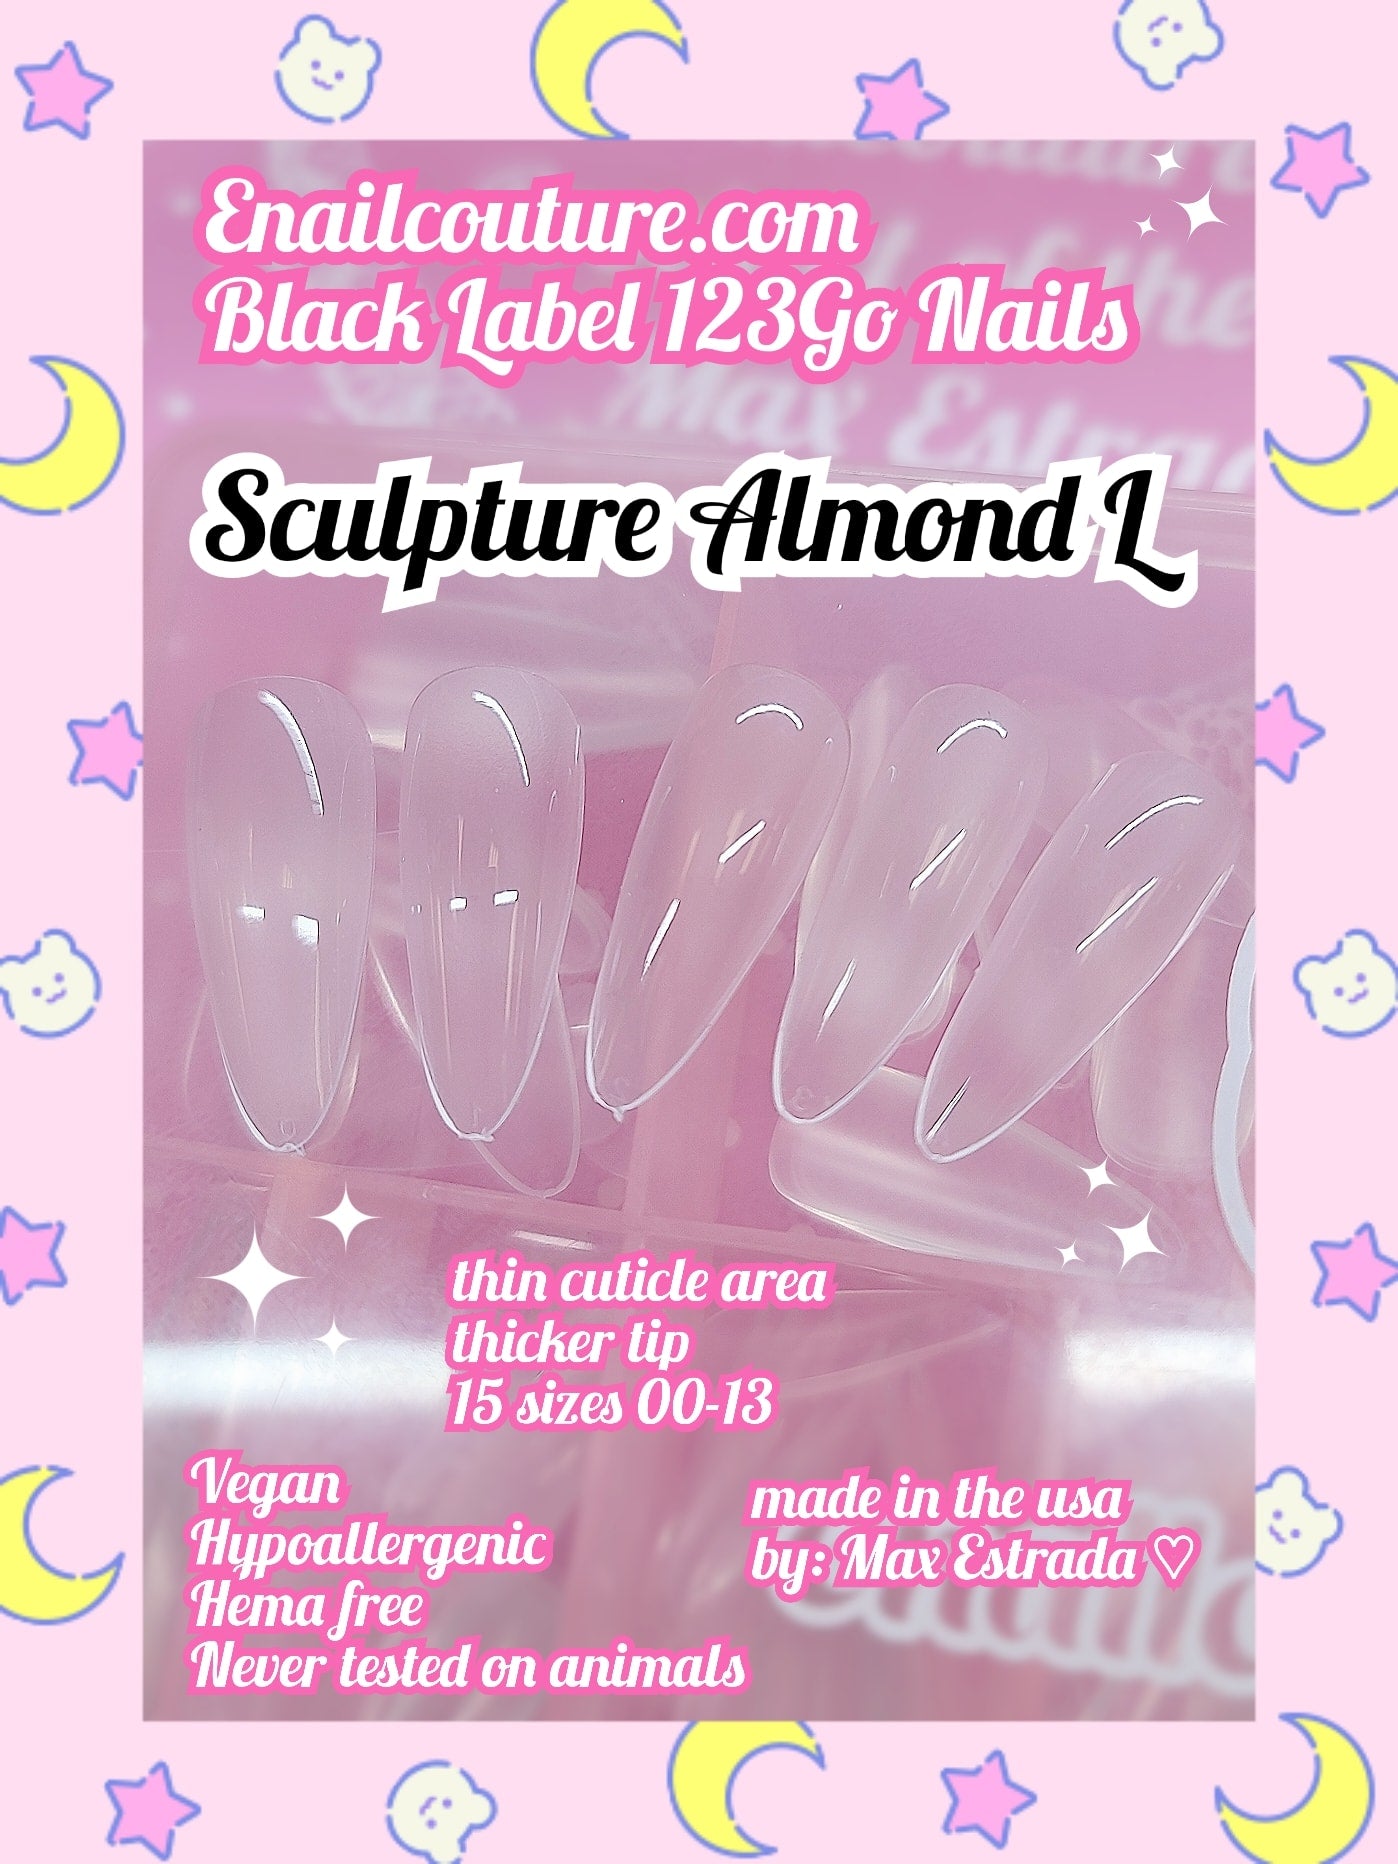 123go Black Label Nails Sculpture Almond L  (Soft Gel Nail Tips- Clear Cover Full Nail Extensions - Pre-shaped Acrylic False Gelly Nail Tips 15 Sizes for DIY Salon Nail Extensions)